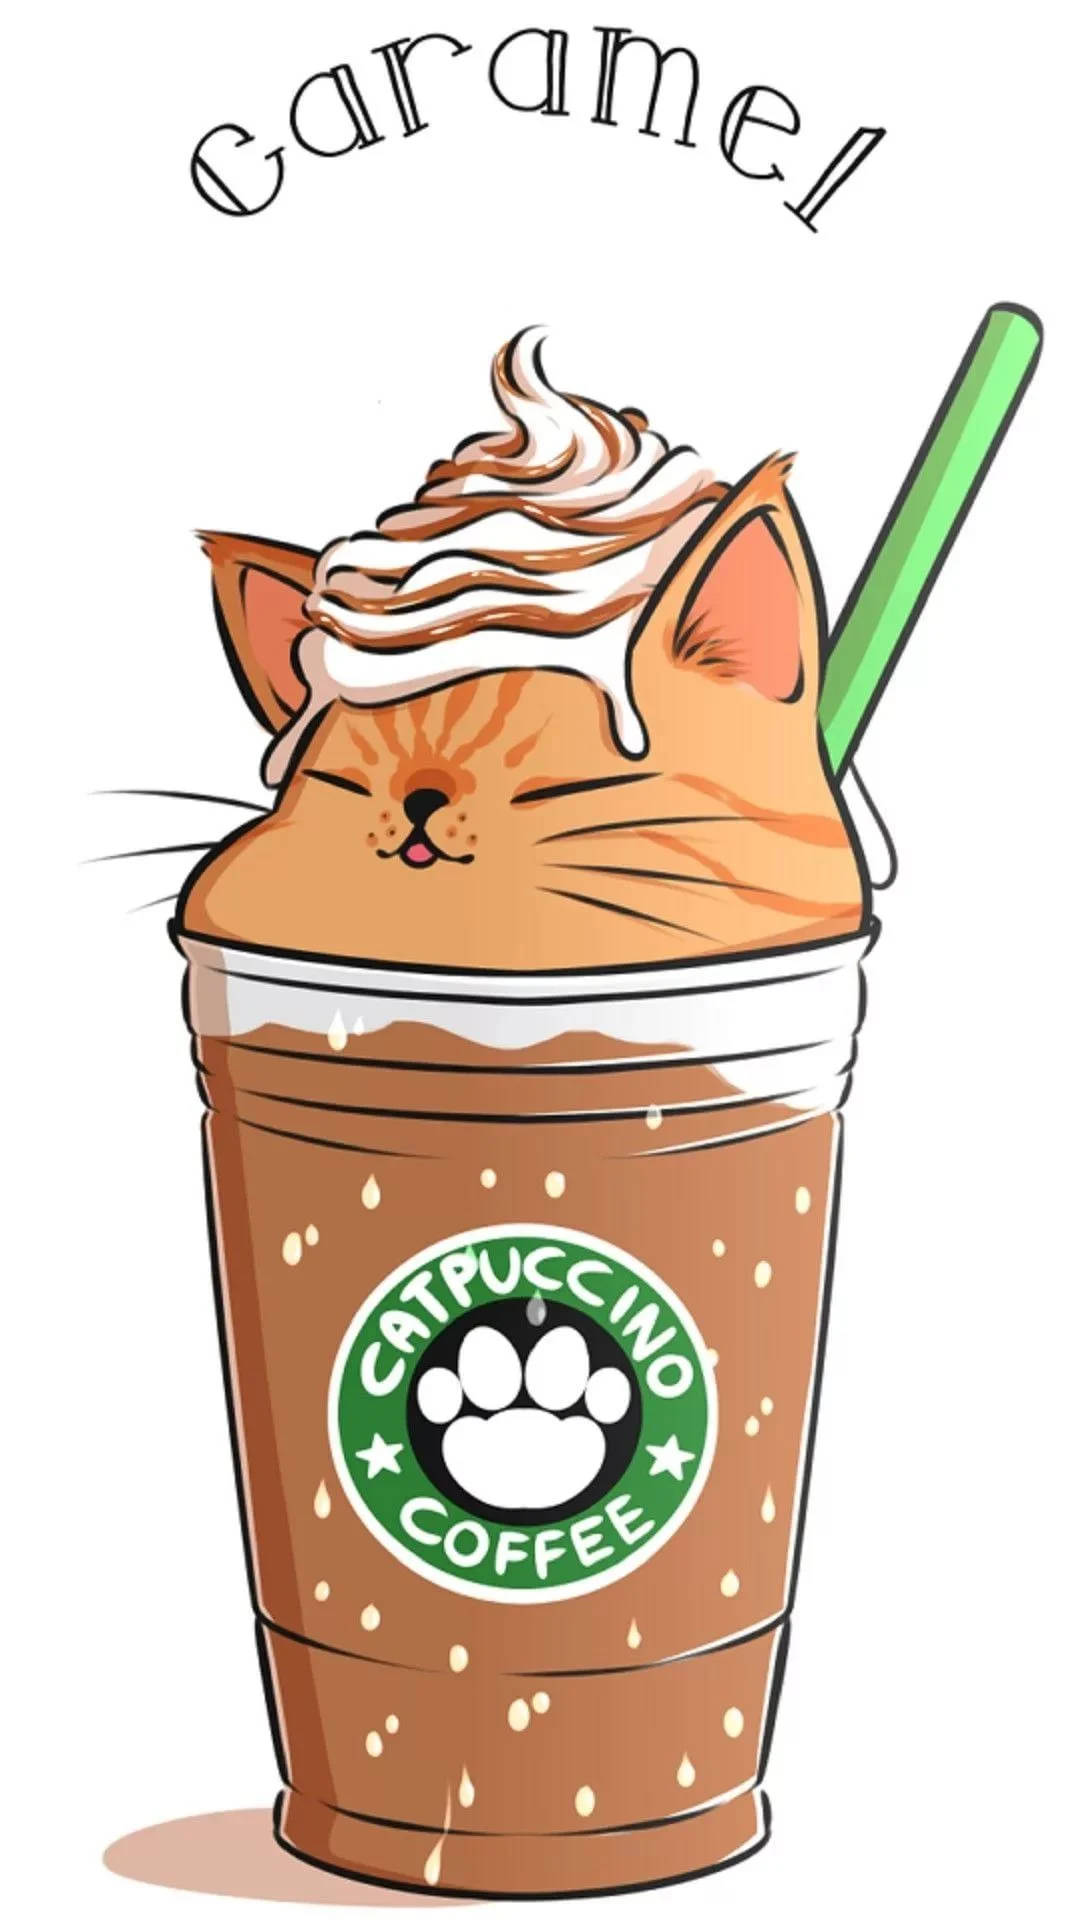 Whimsical Catpuccino Art At Starbucks Background